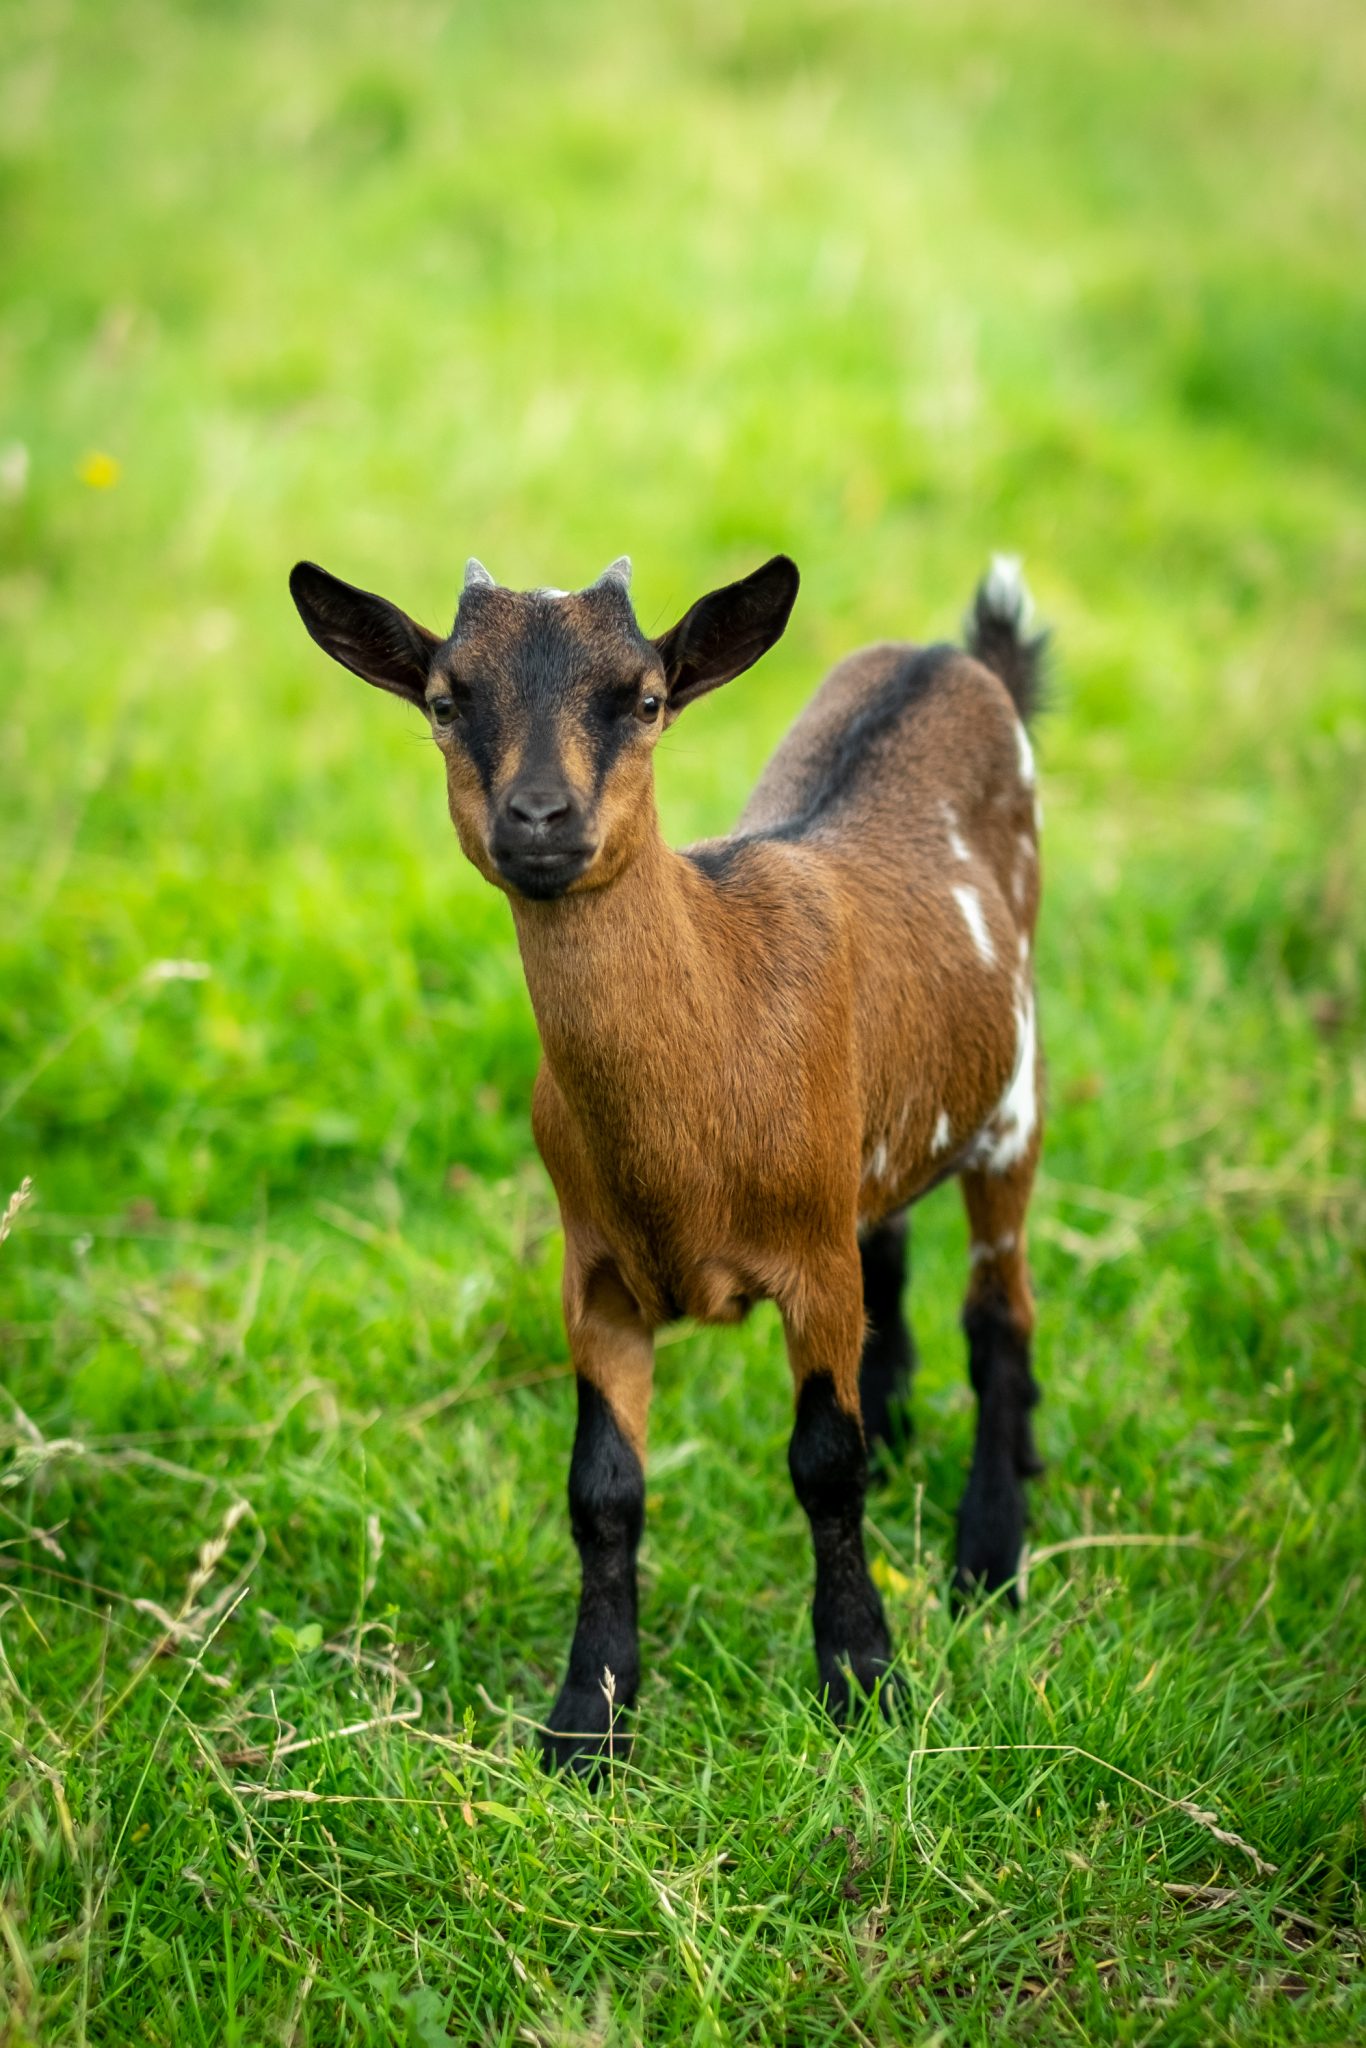 A young goat in a field of grass